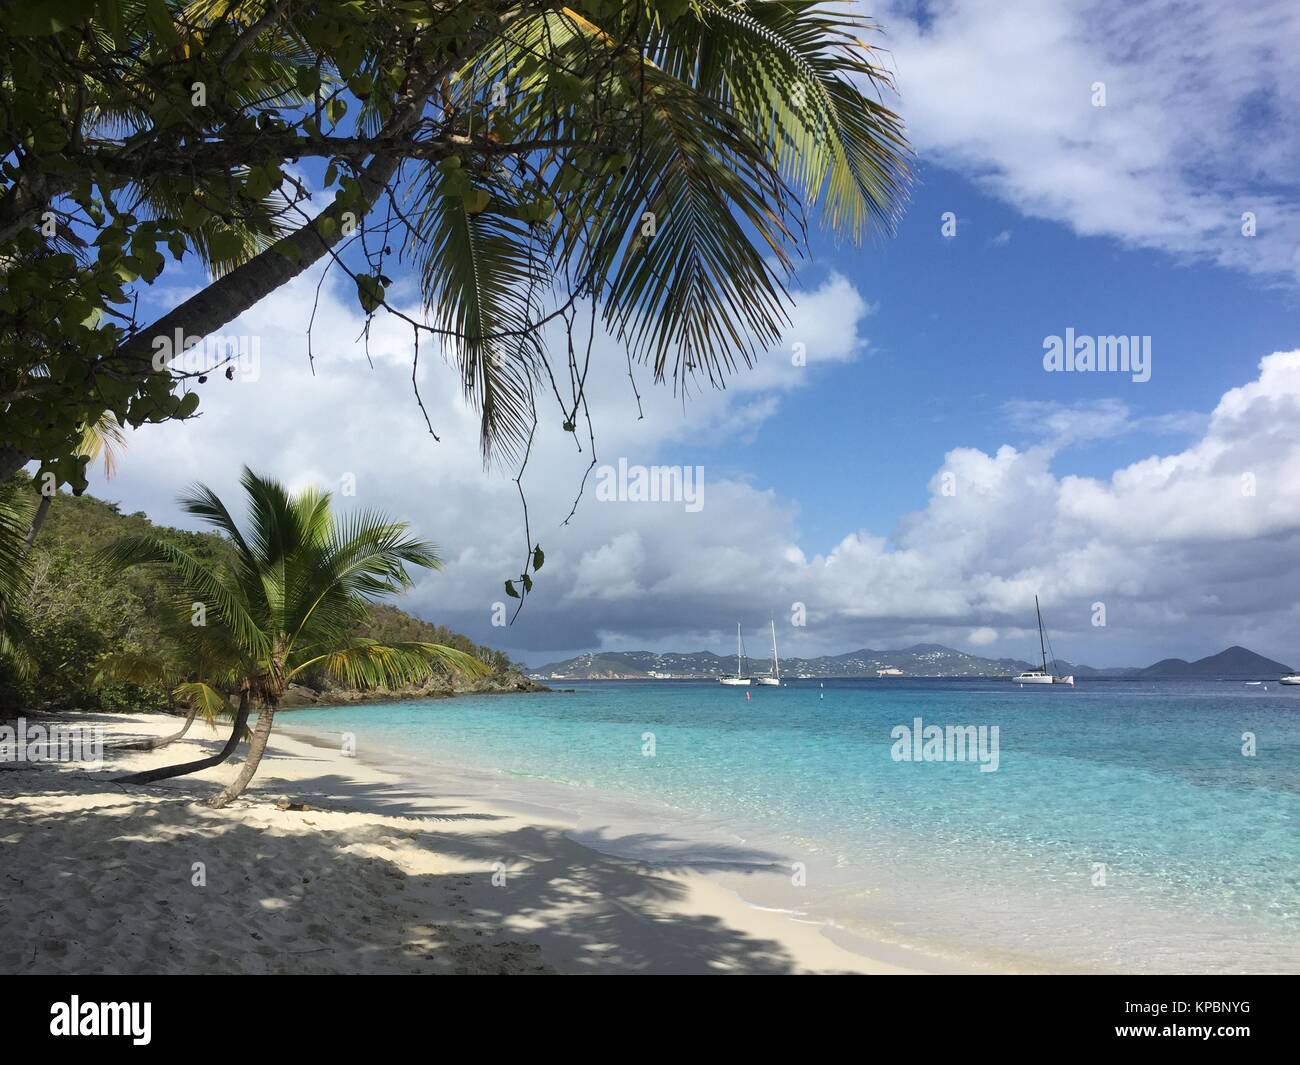 White sand and turquoise water at Salomon Beach May 5, 2016 in St. John, U.S. Virgin Islands. Stock Photo